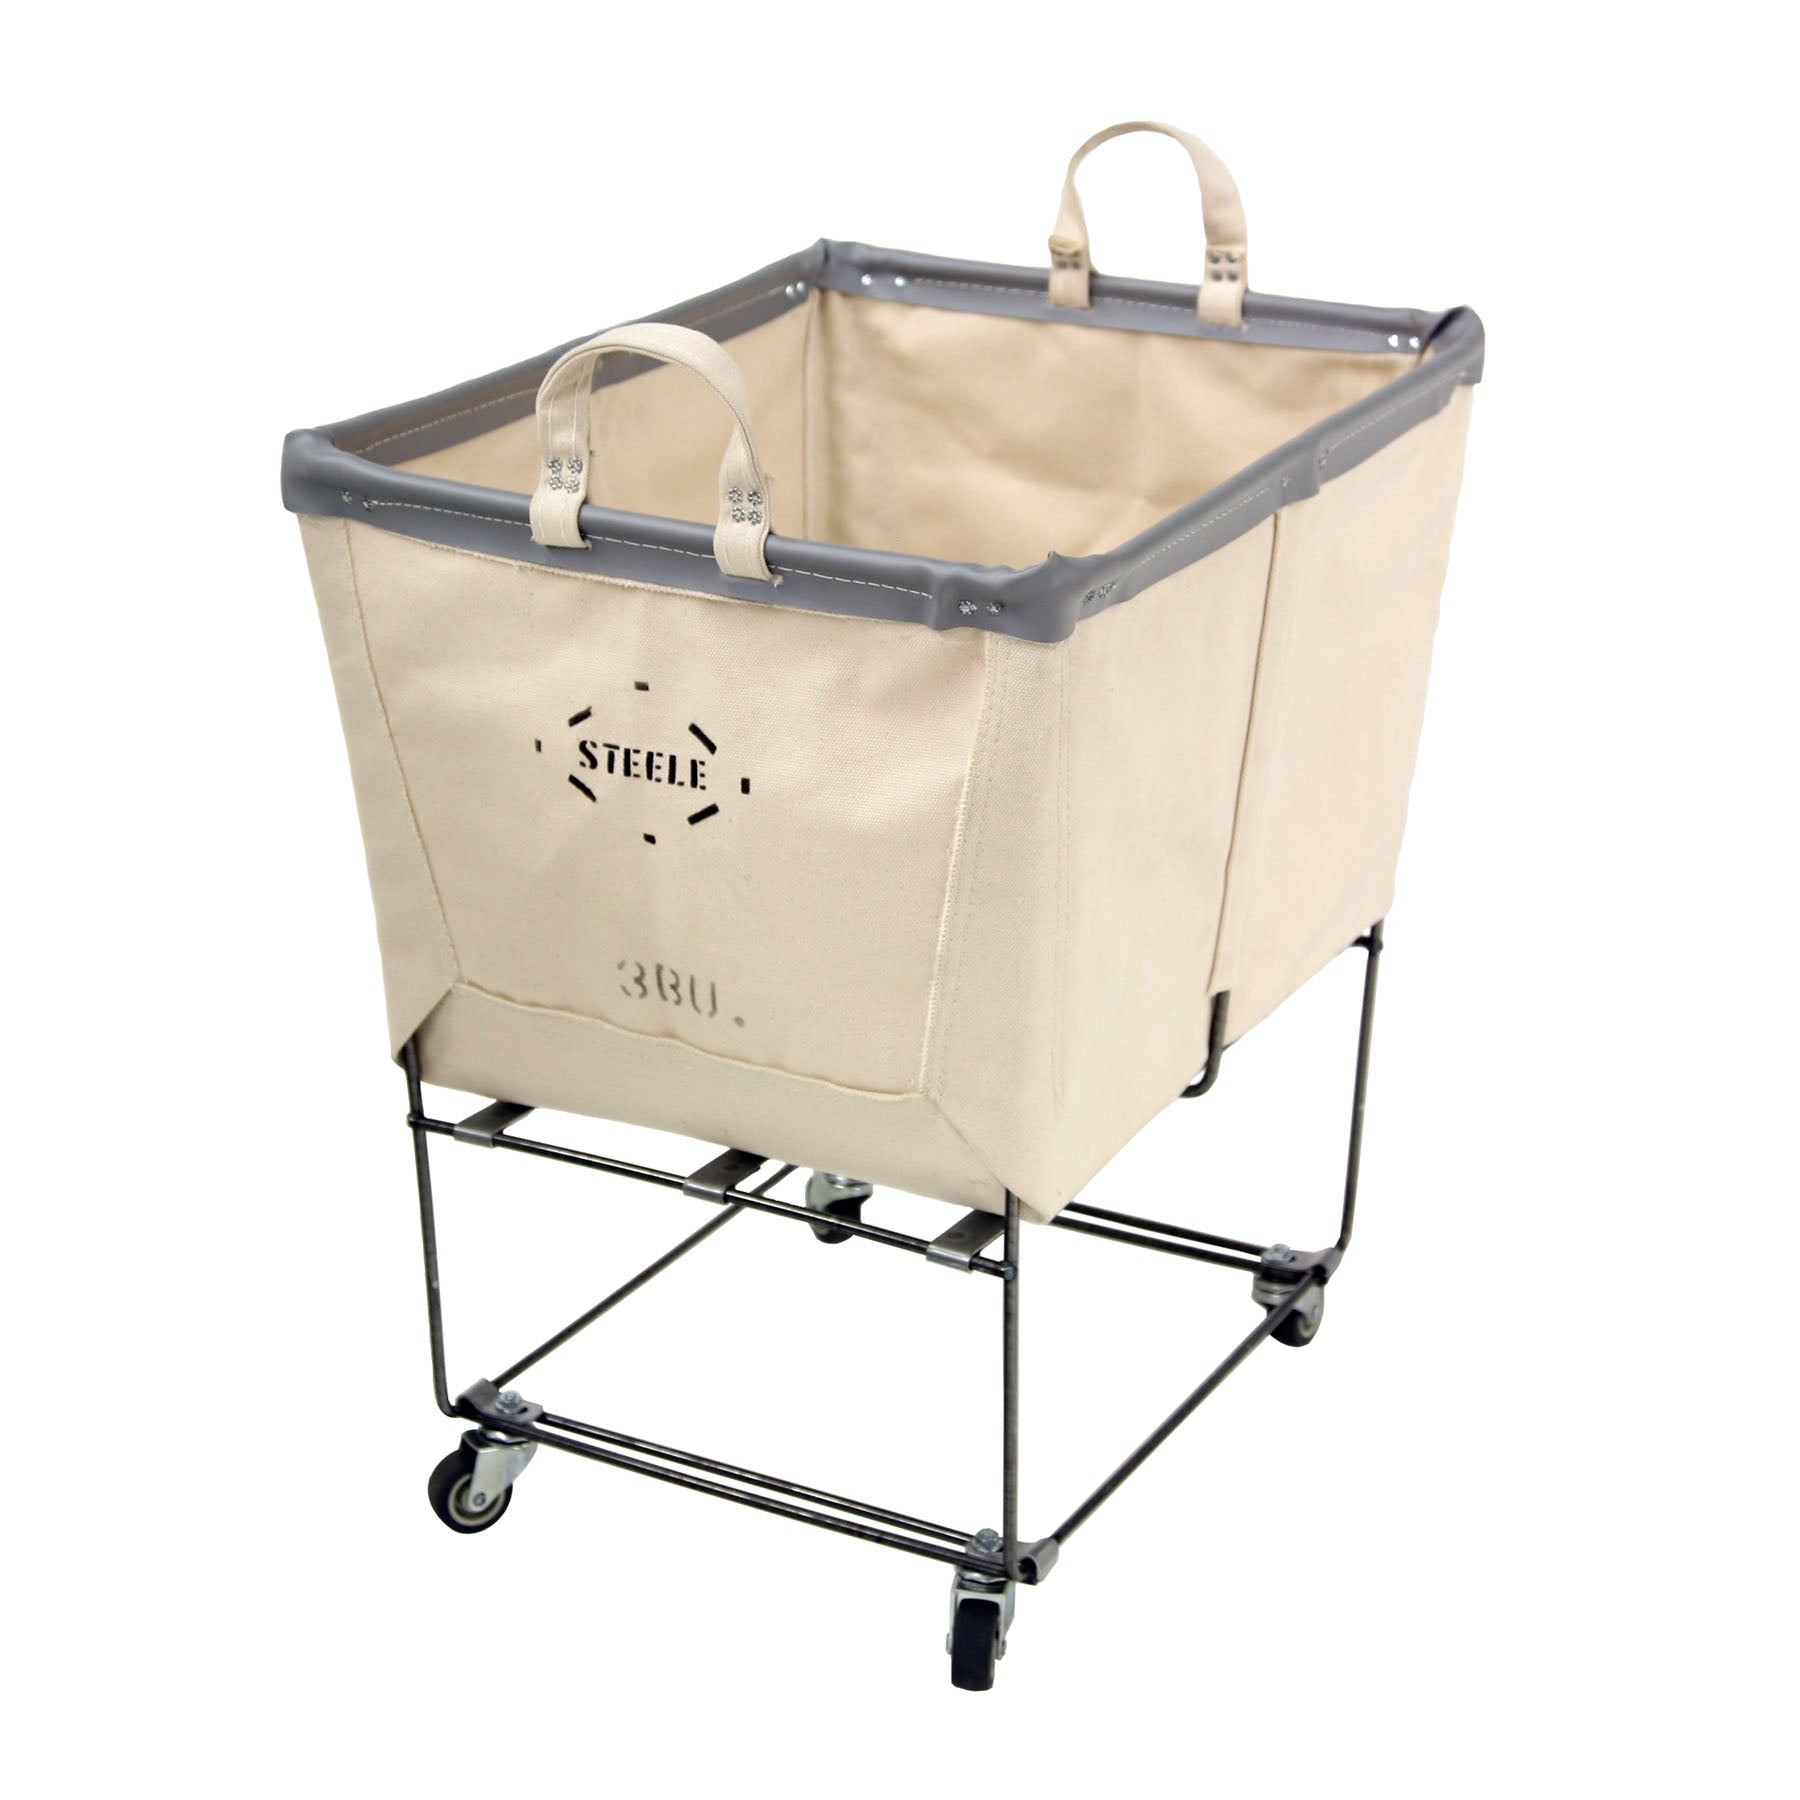 Metal Rectangular Cart/Laundry Basket with Mesh Sides and 4 Casters Coated,  Red - 35 x 28 x 16 - Bunting Online Auctions